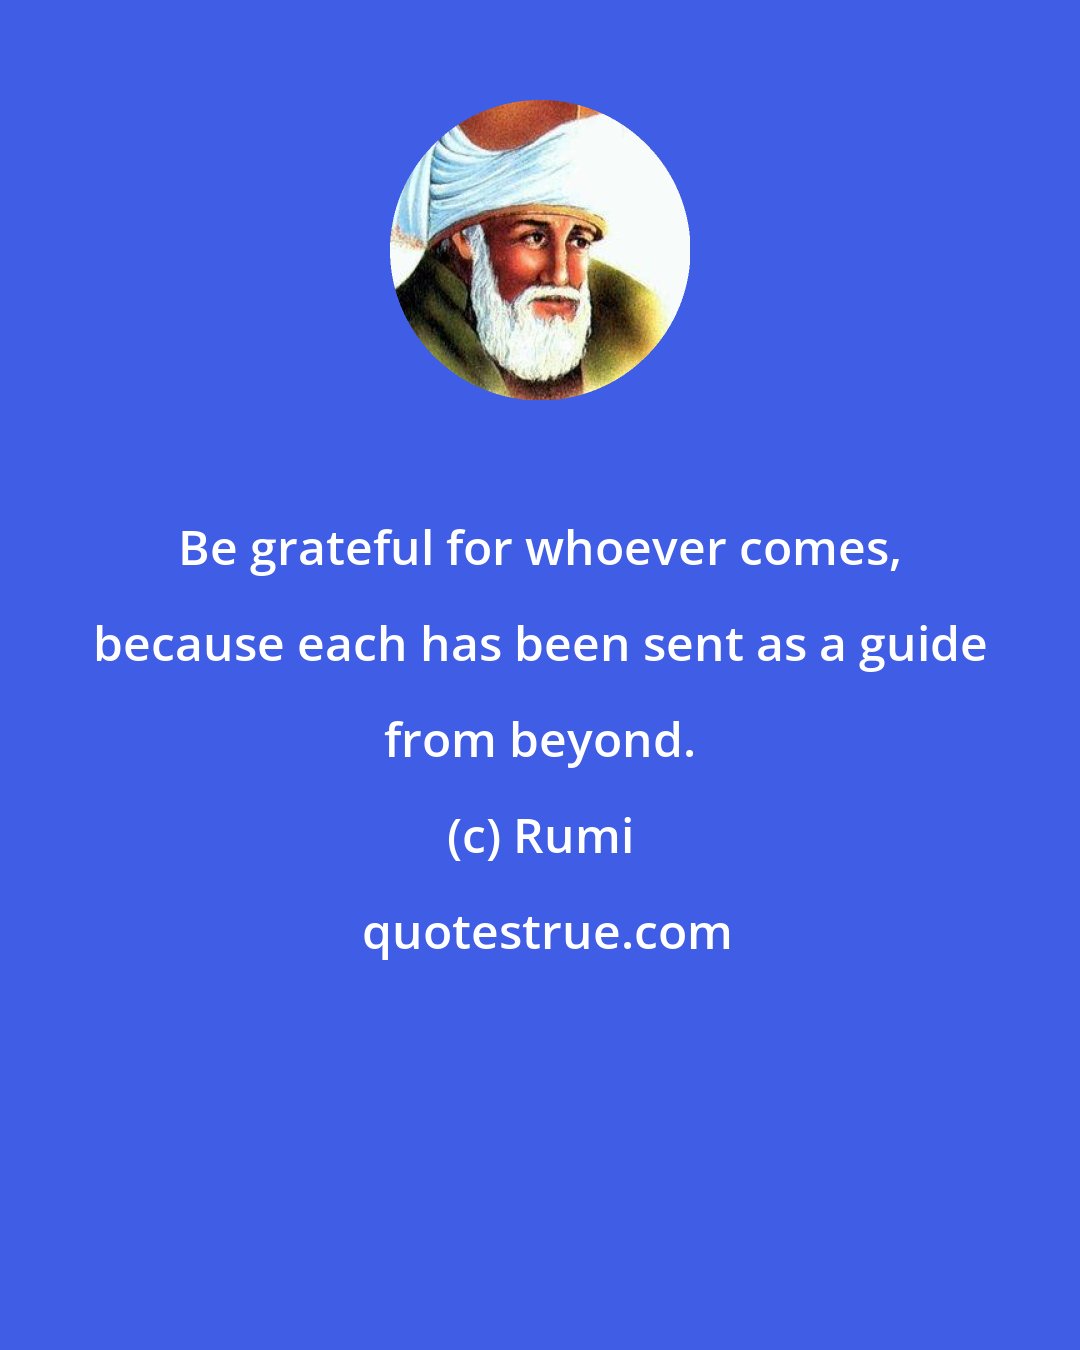 Rumi: Be grateful for whoever comes, because each has been sent as a guide from beyond.